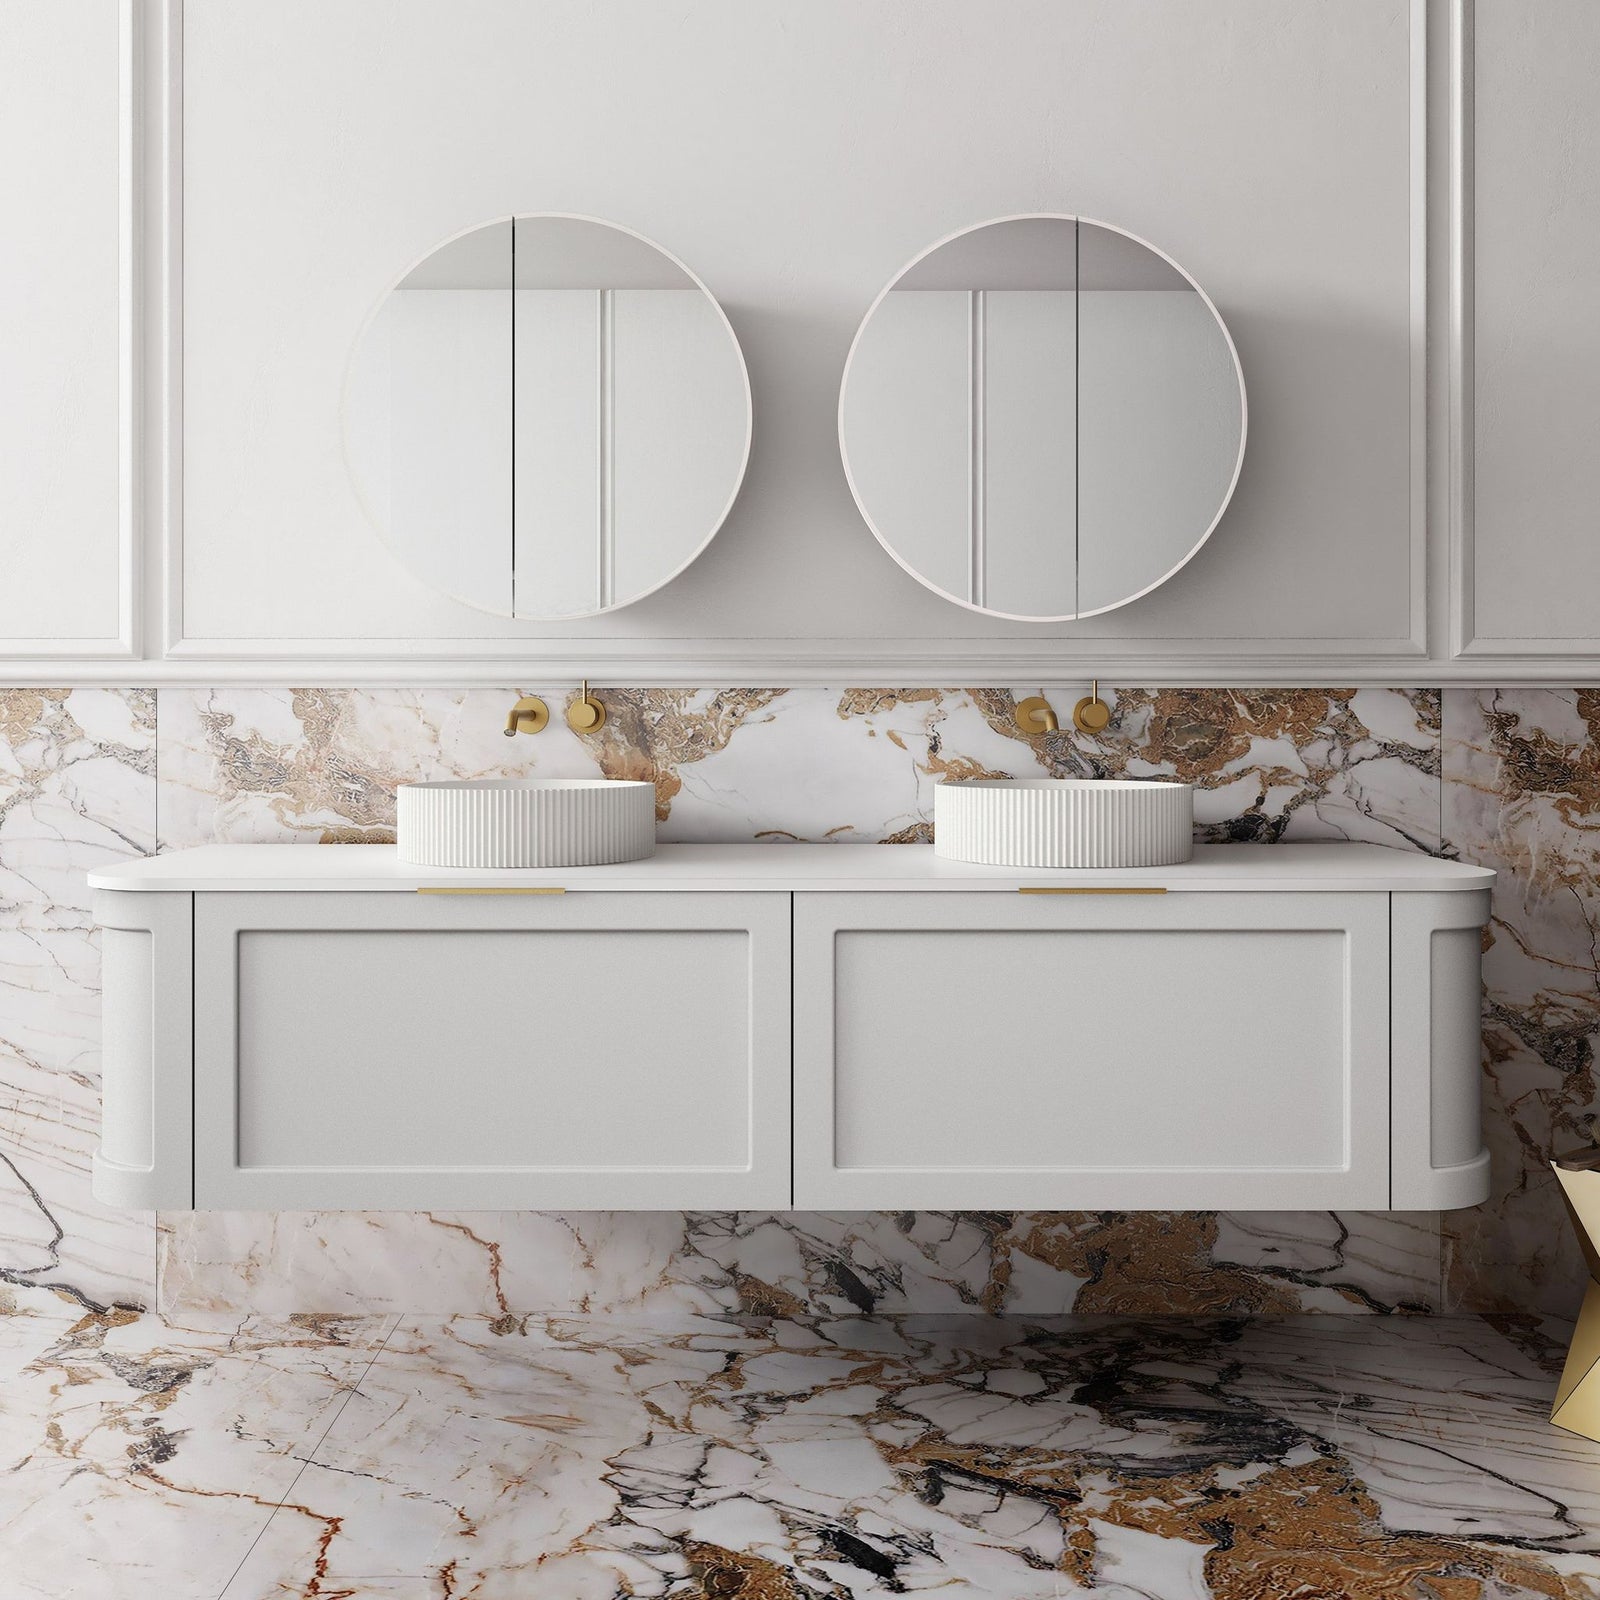 Cassa Design Westminister curved wall hung vanity